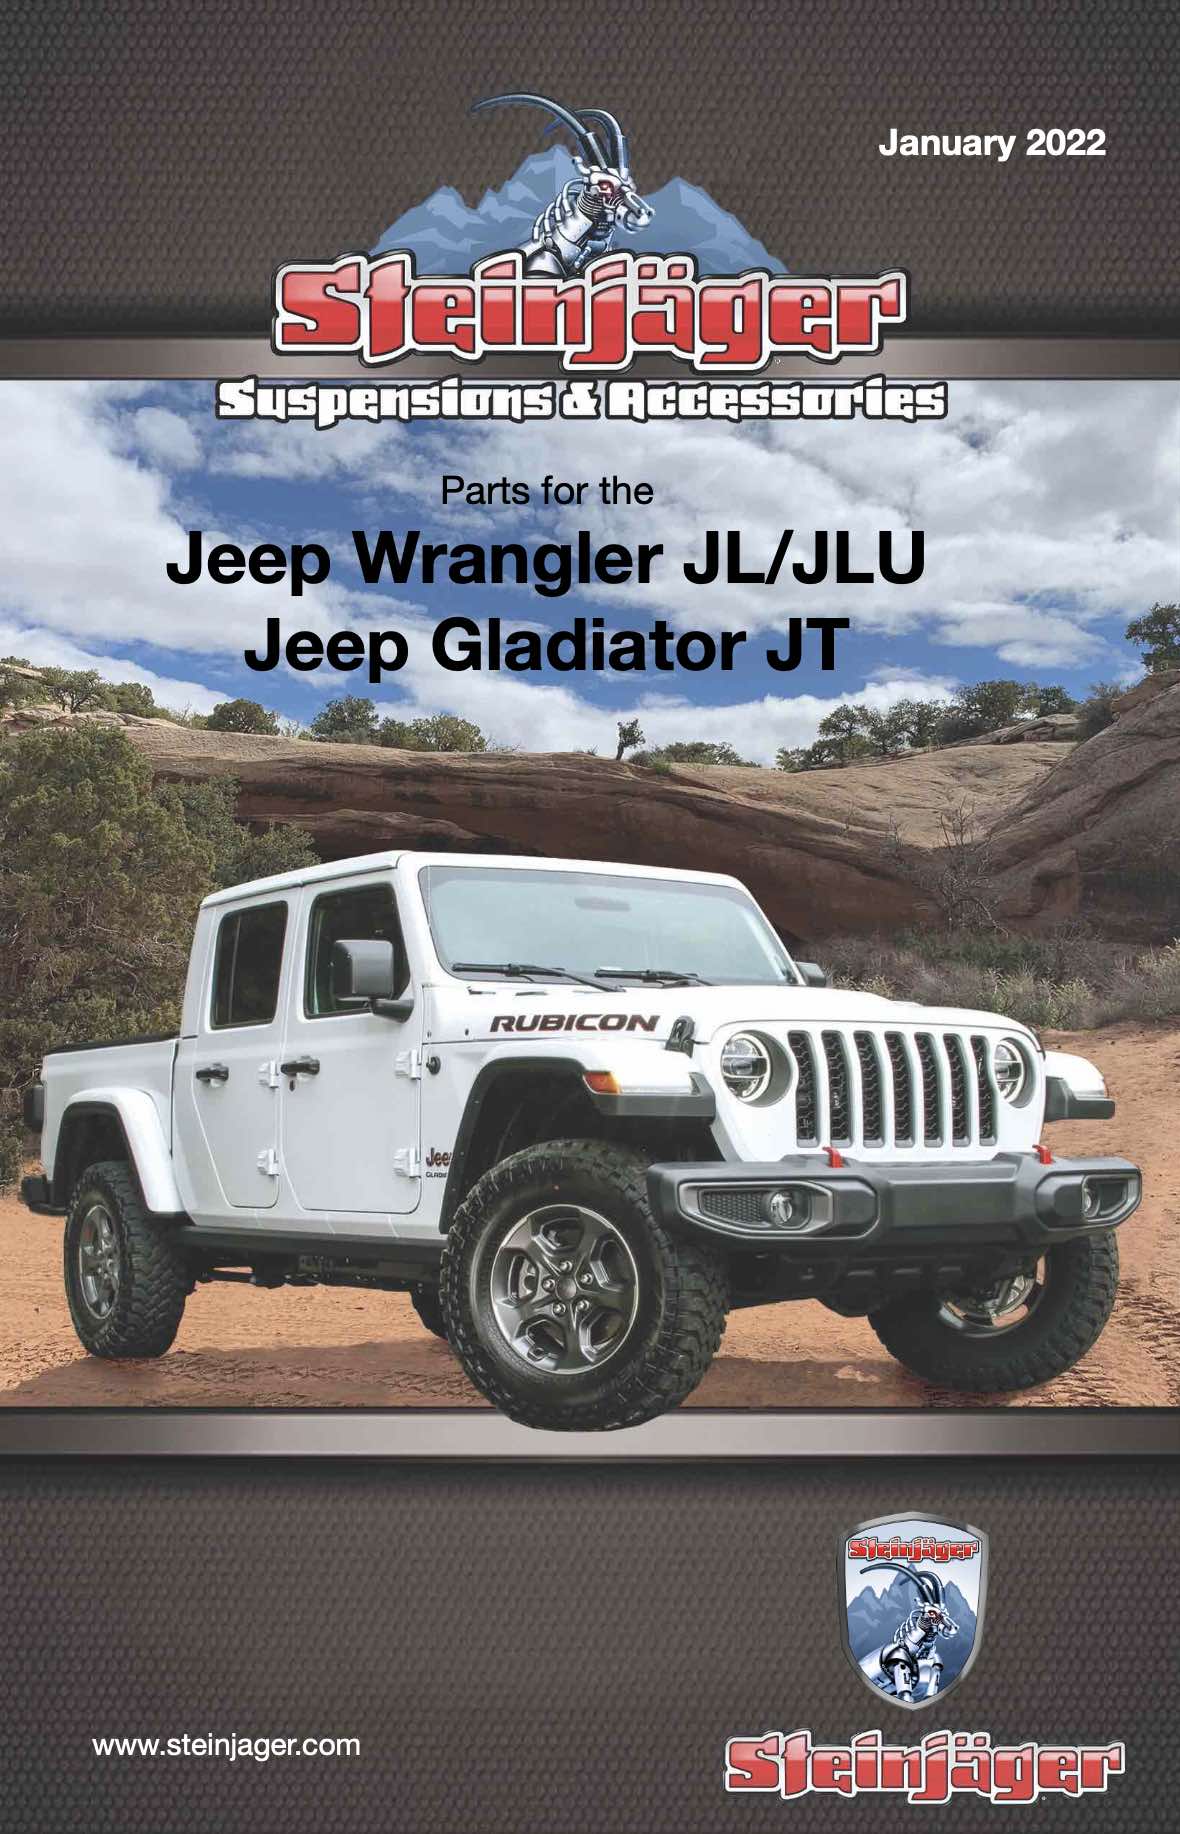 Catalog for Jeep Wrangler JL and JLU, and Gladiator JT